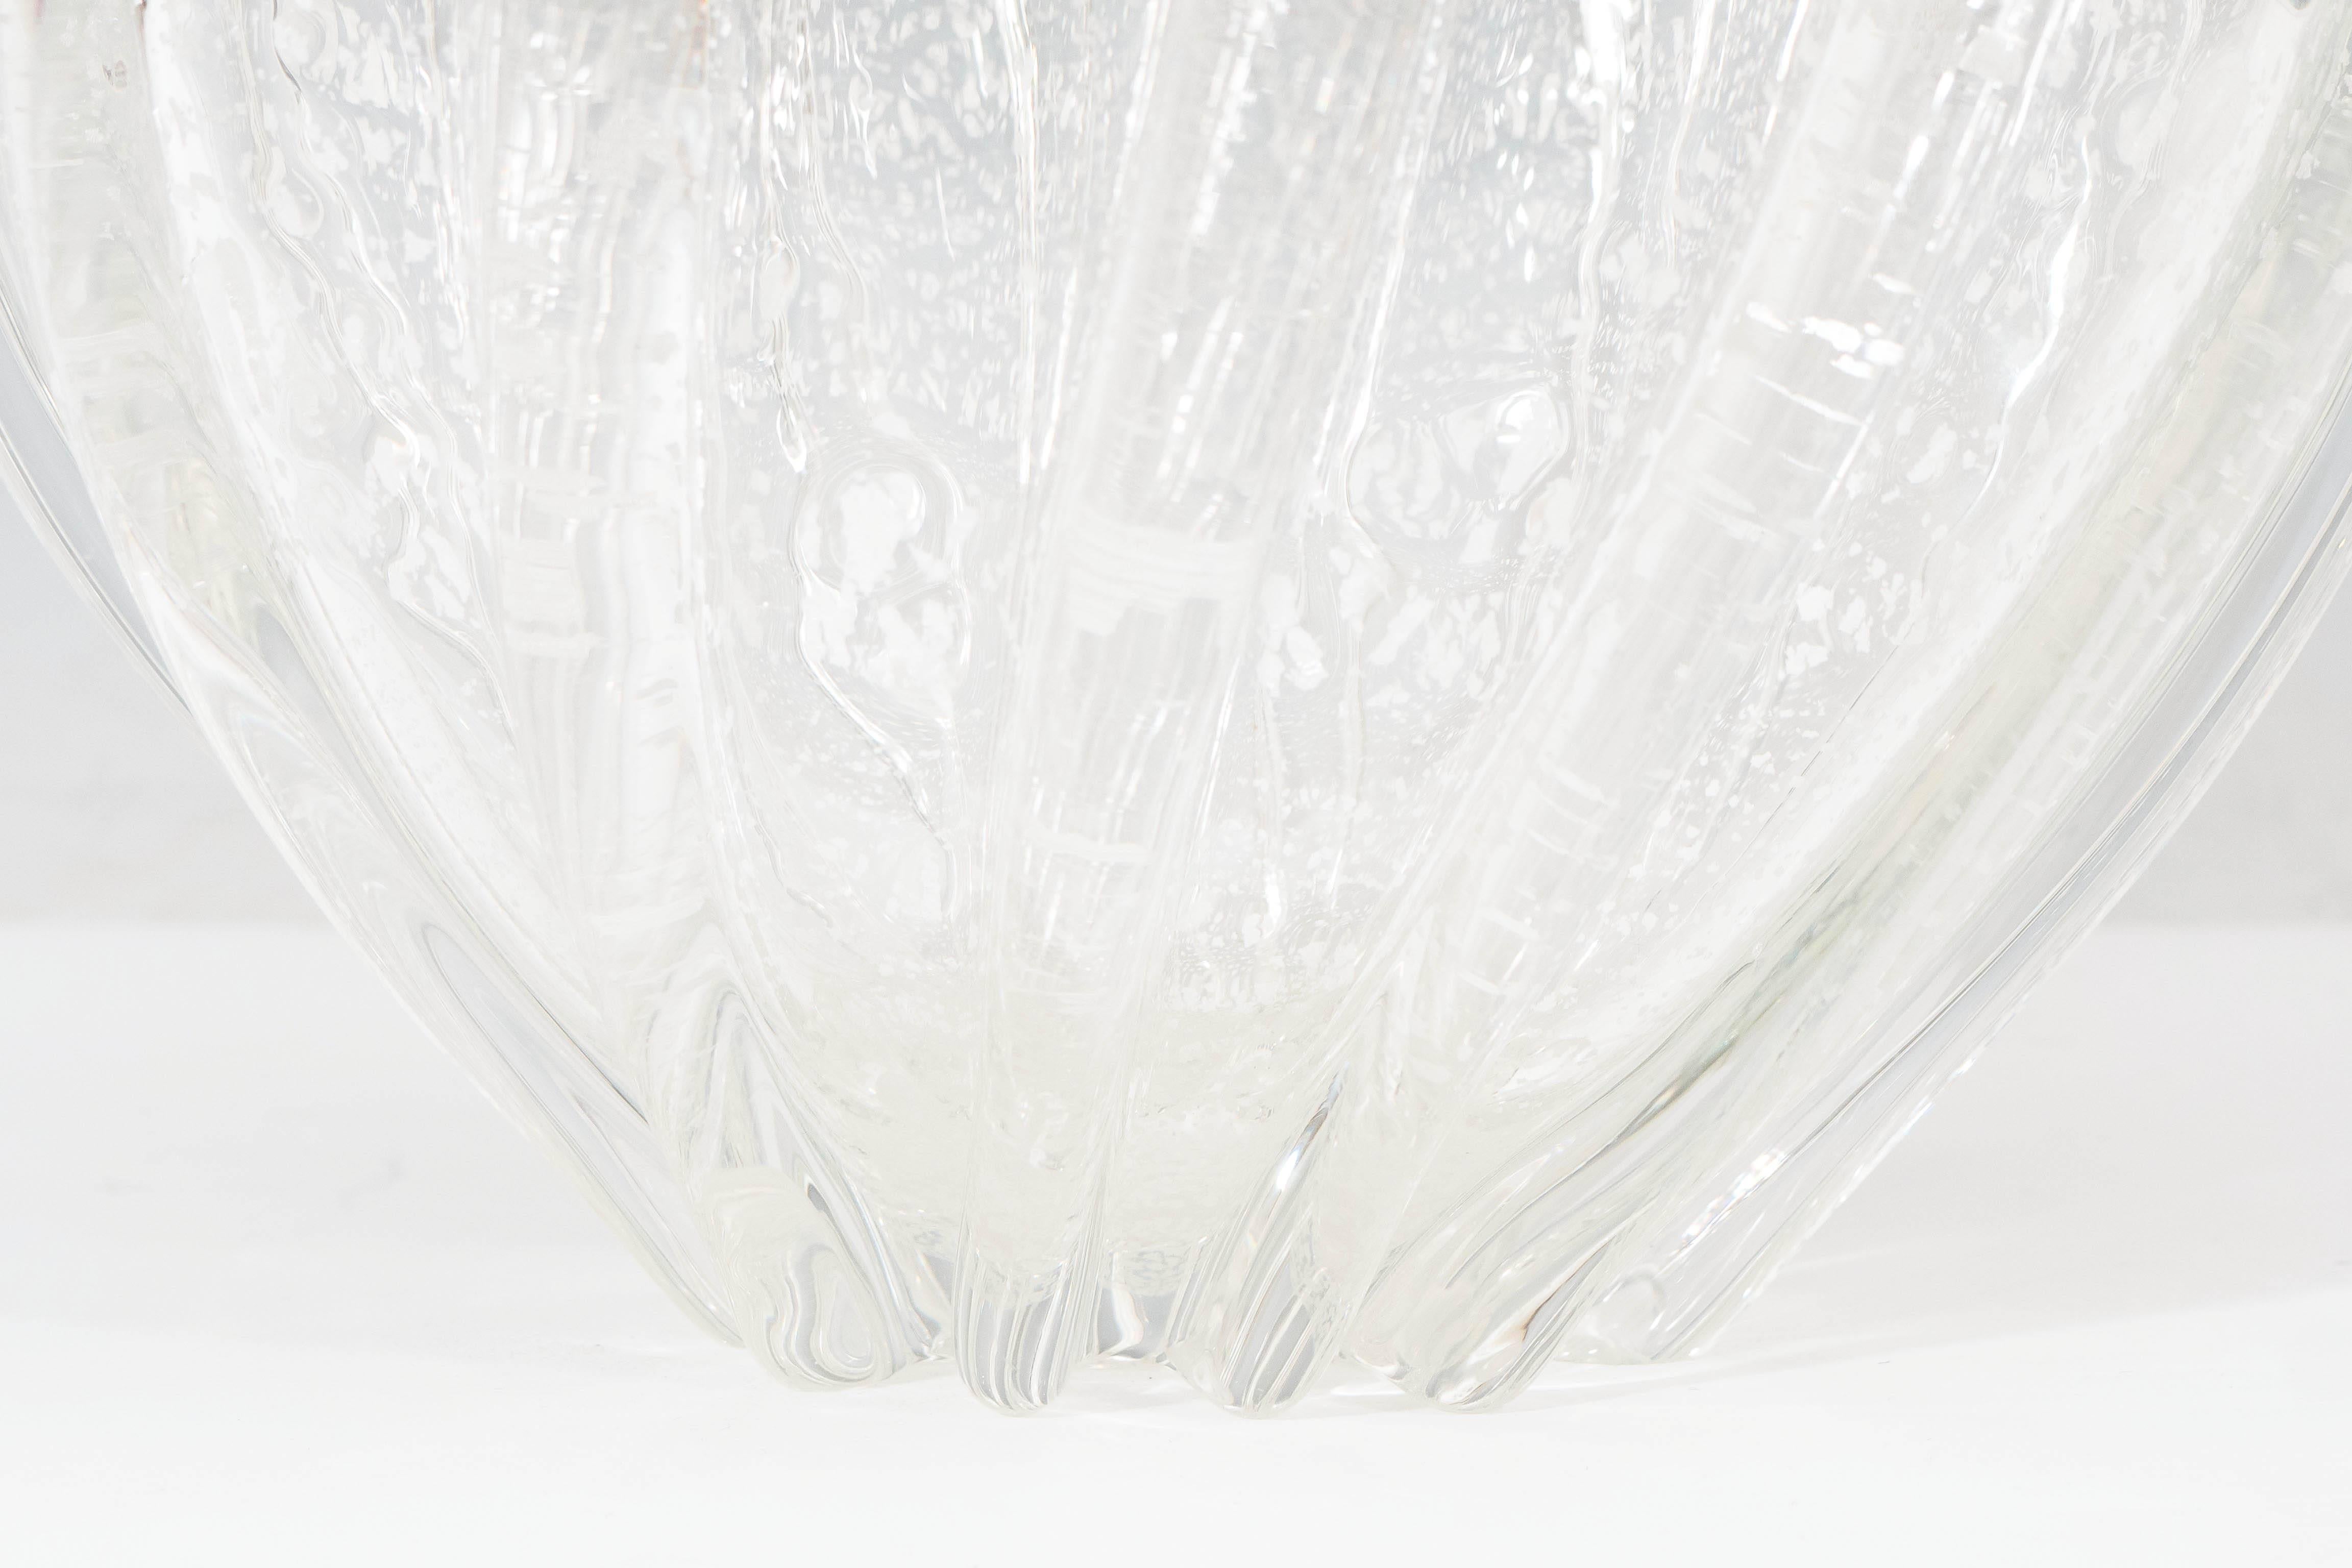 A Murano glass 'Pillow' vase after Seguso, produced, circa 1960s with ribbed body, infused with silver leaf flecks. This glass remains in very good vintage condition, consistent with age.